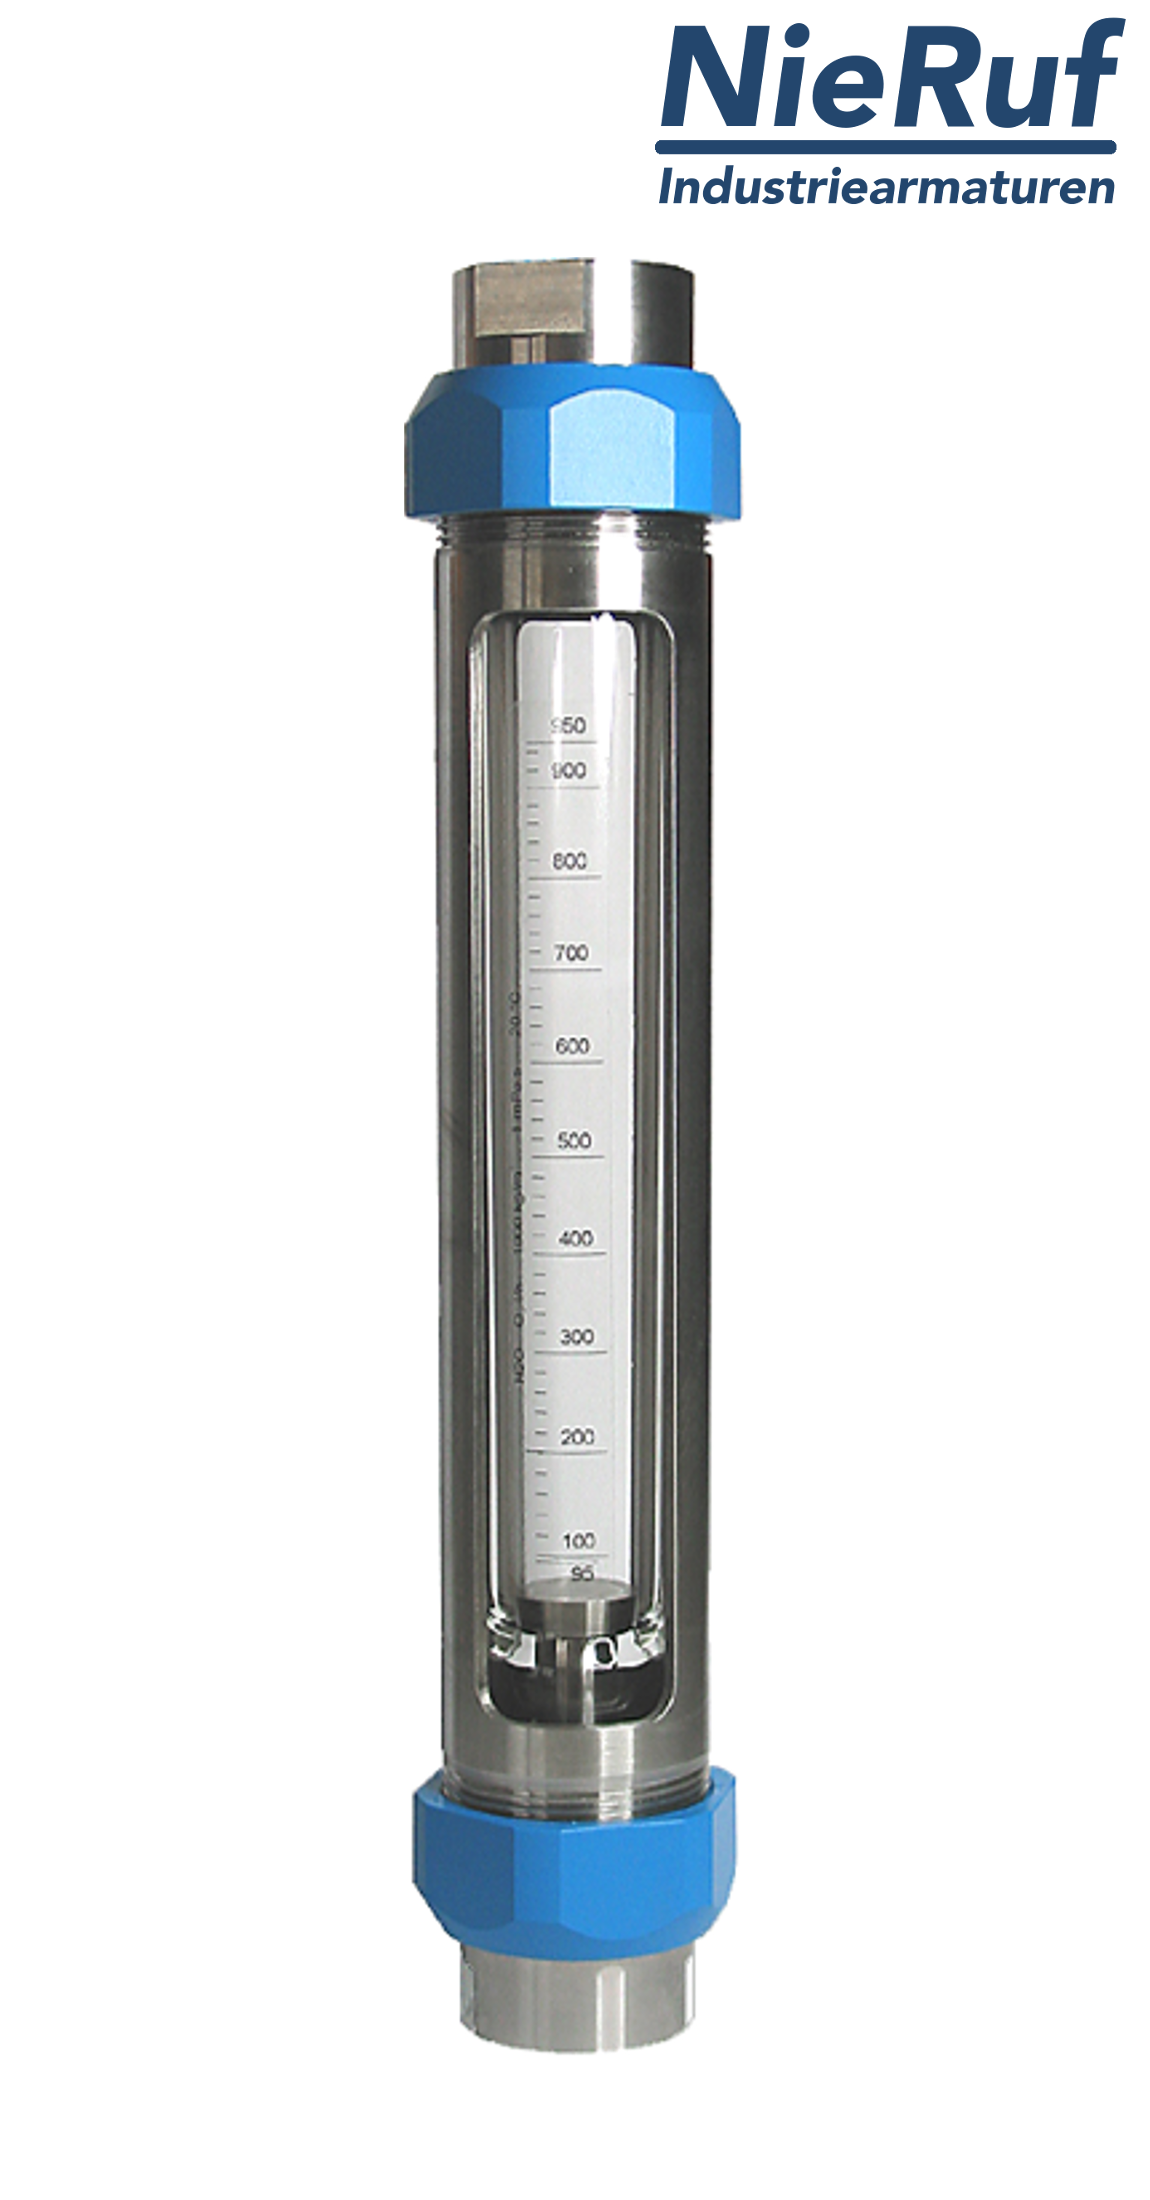 Variable area flowmeter stainless steel + borosilicate 1/2" inch 40.0 - 400.0 l/h water FKM